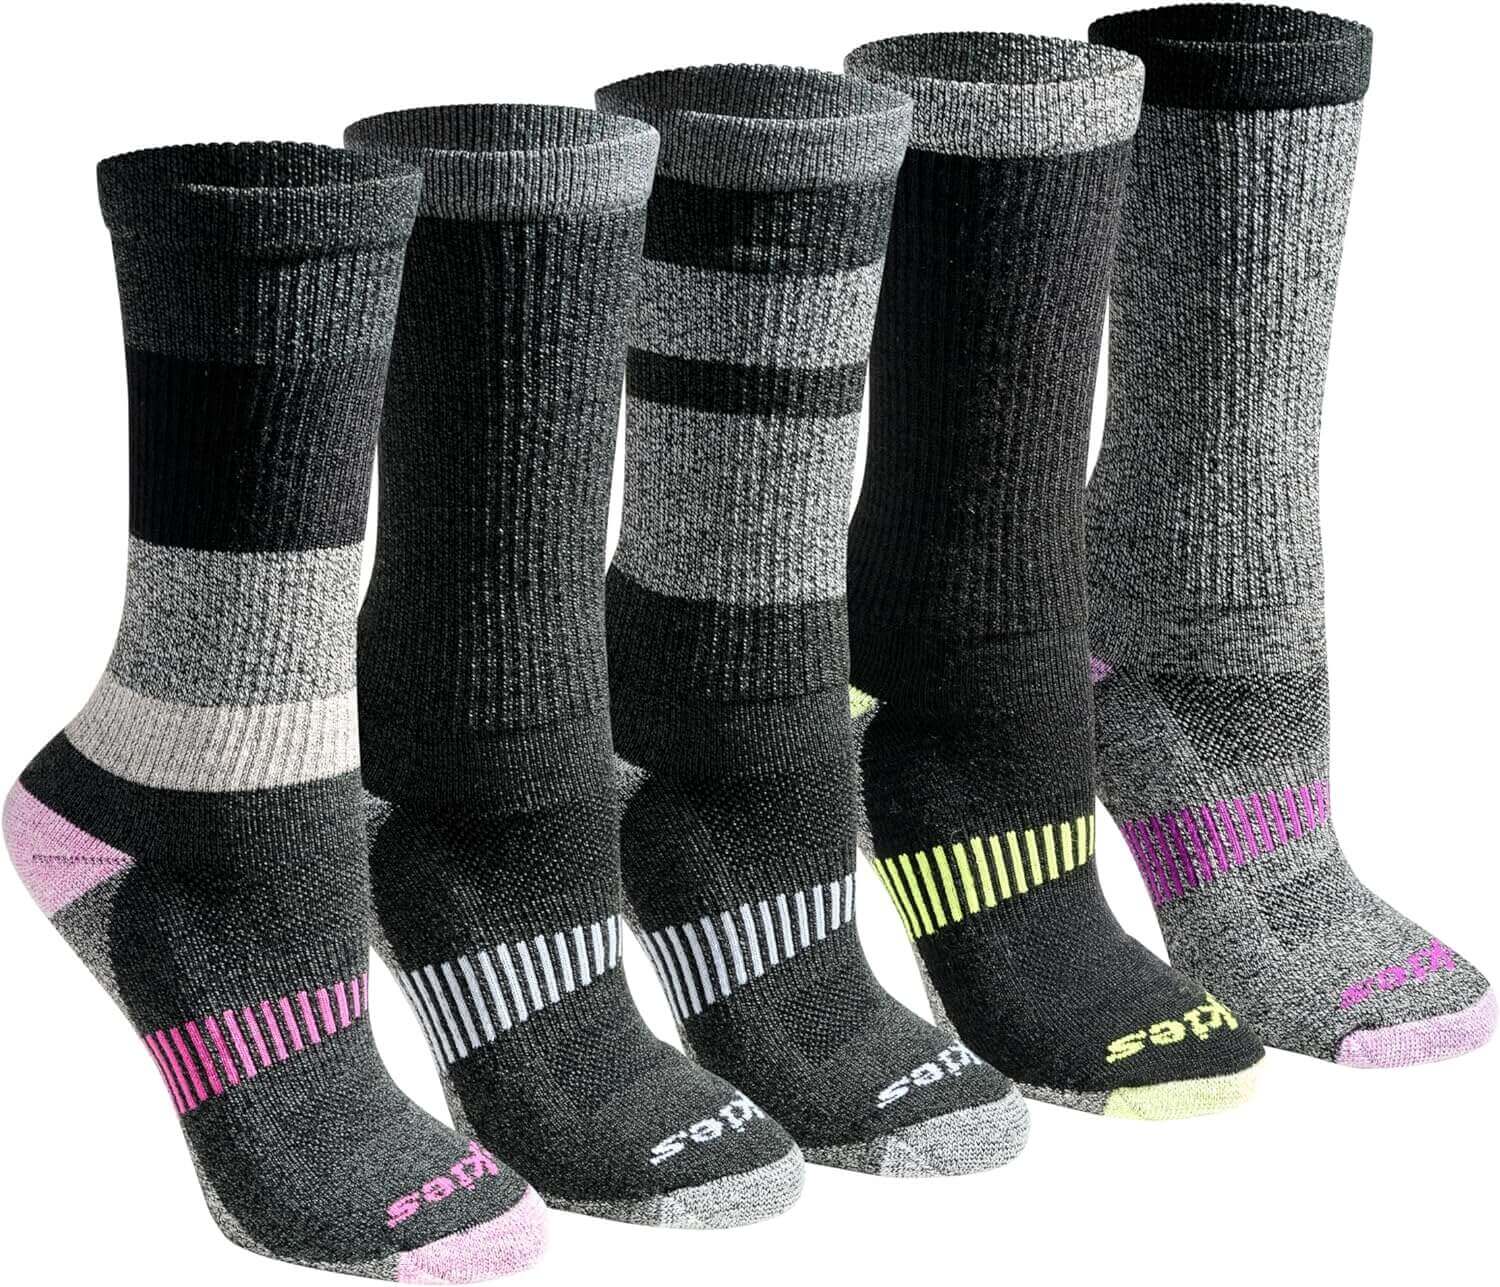 Shop The Latest >Women's Dri-tech Moisture Control Crew Socks Multipack > *Only $24.29*> From The Top Brand > *Dickiesl* > Shop Now and Get Free Shipping On Orders Over $45.00 >*Shop Earth Foot*